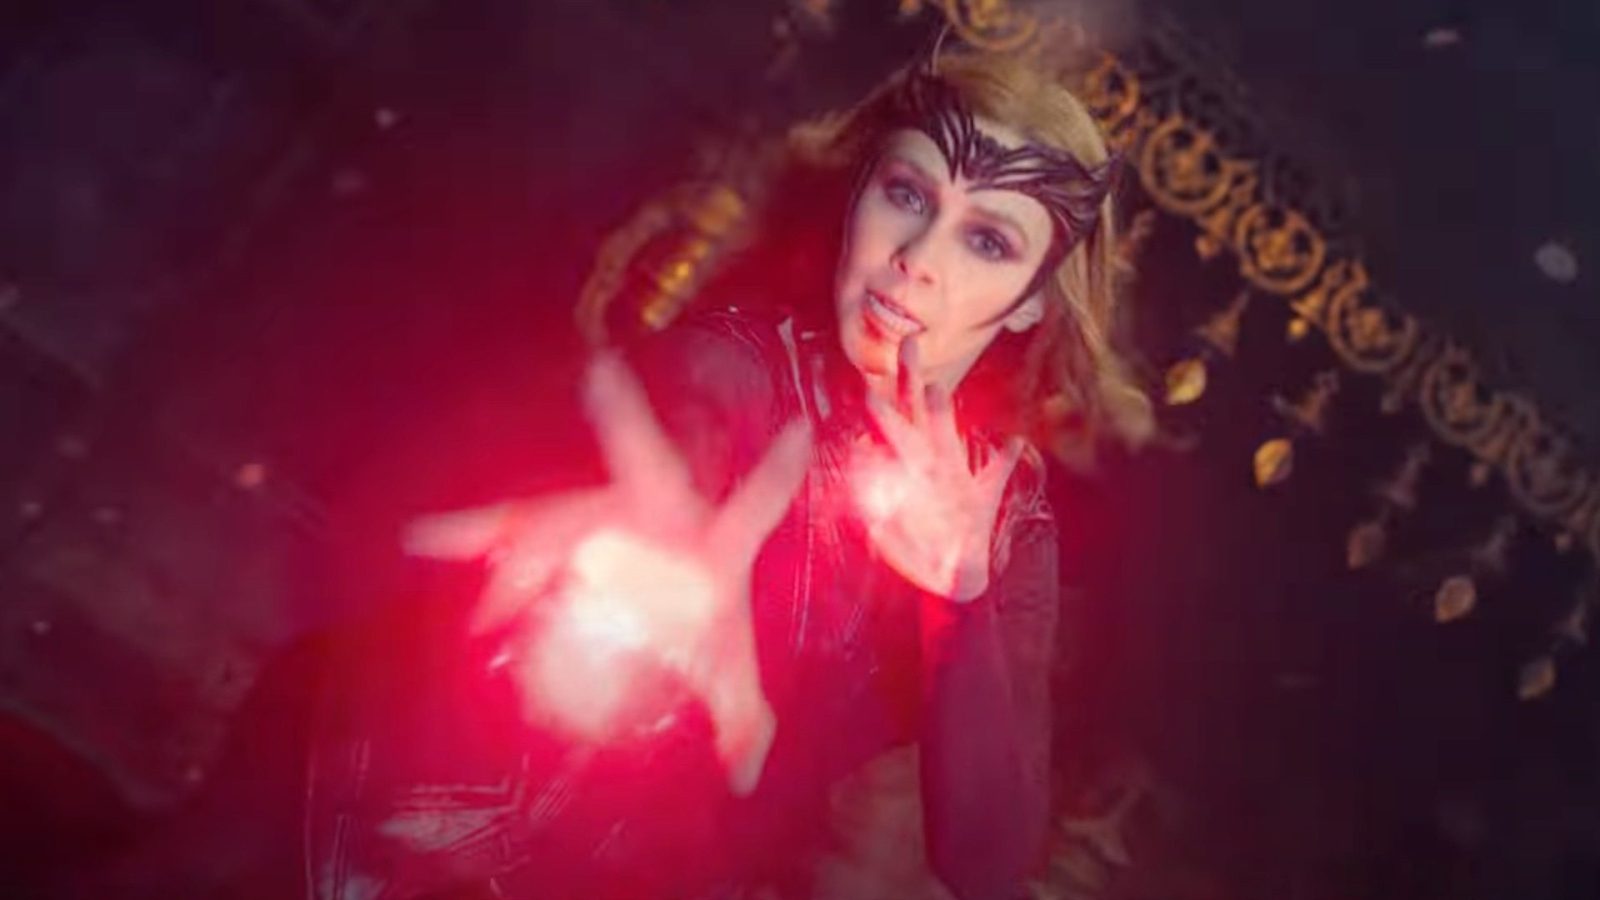 The Scarlet Witch returns in Doctor Strange in the Multiverse of Madness featurette